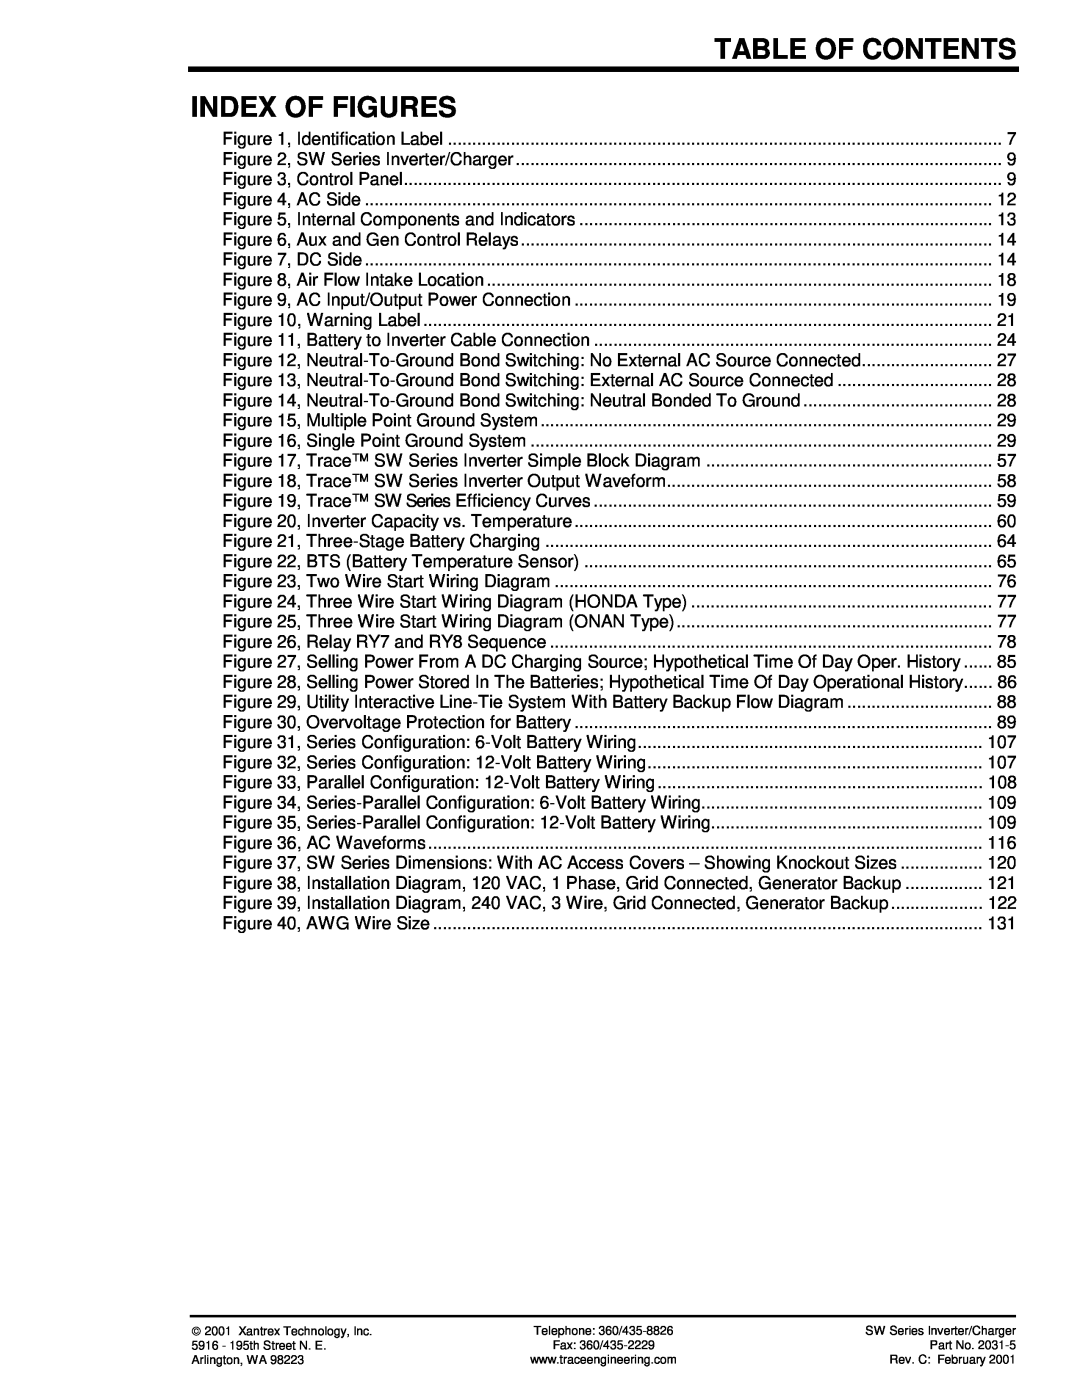 Xantrex Technology SW Series owner manual Index Of Figures, Table Of Contents 